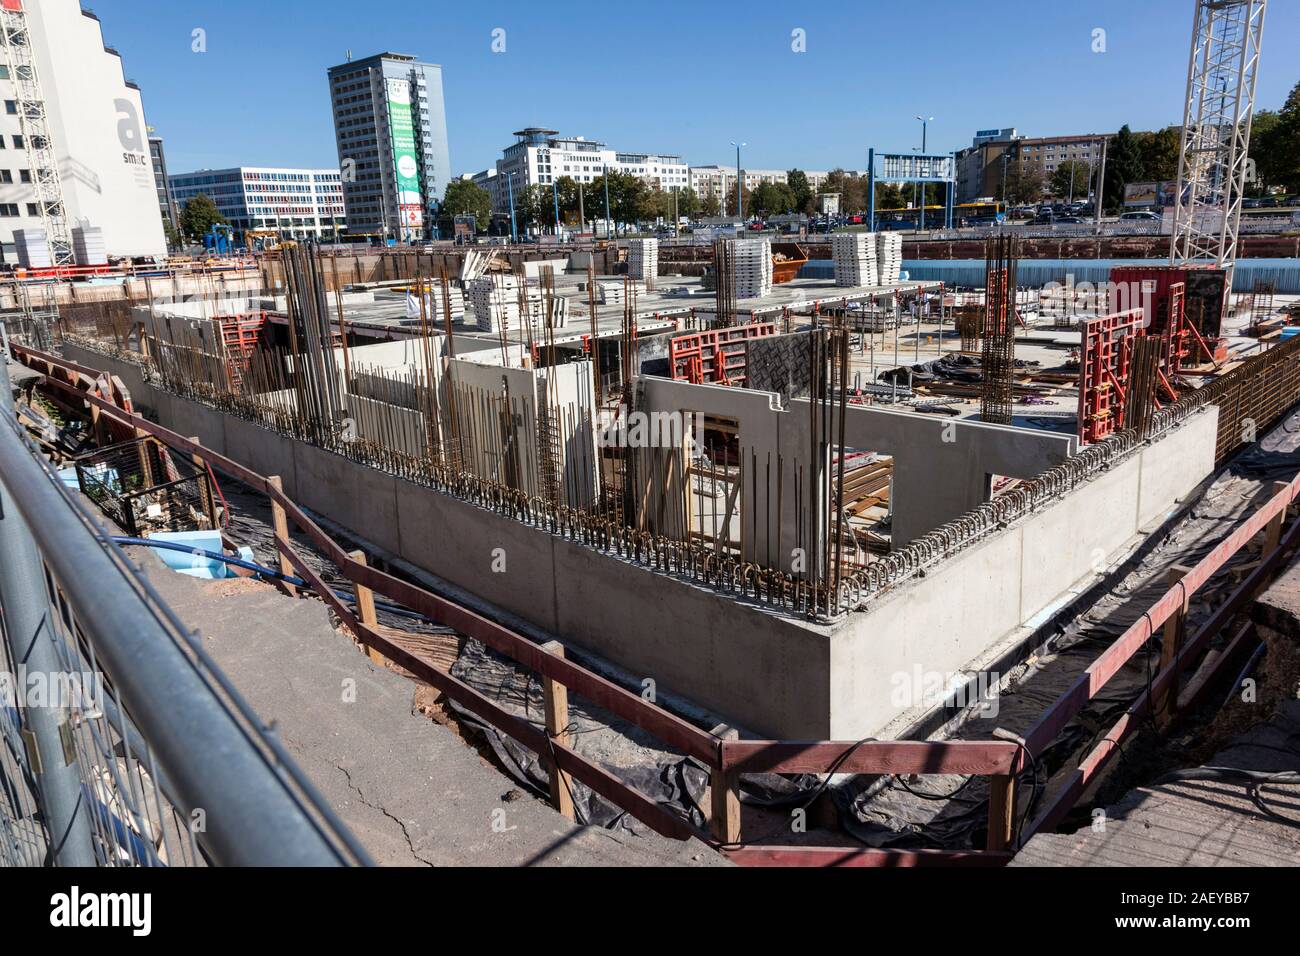 Large construction site in the city center of Chemnitz Stock Photo